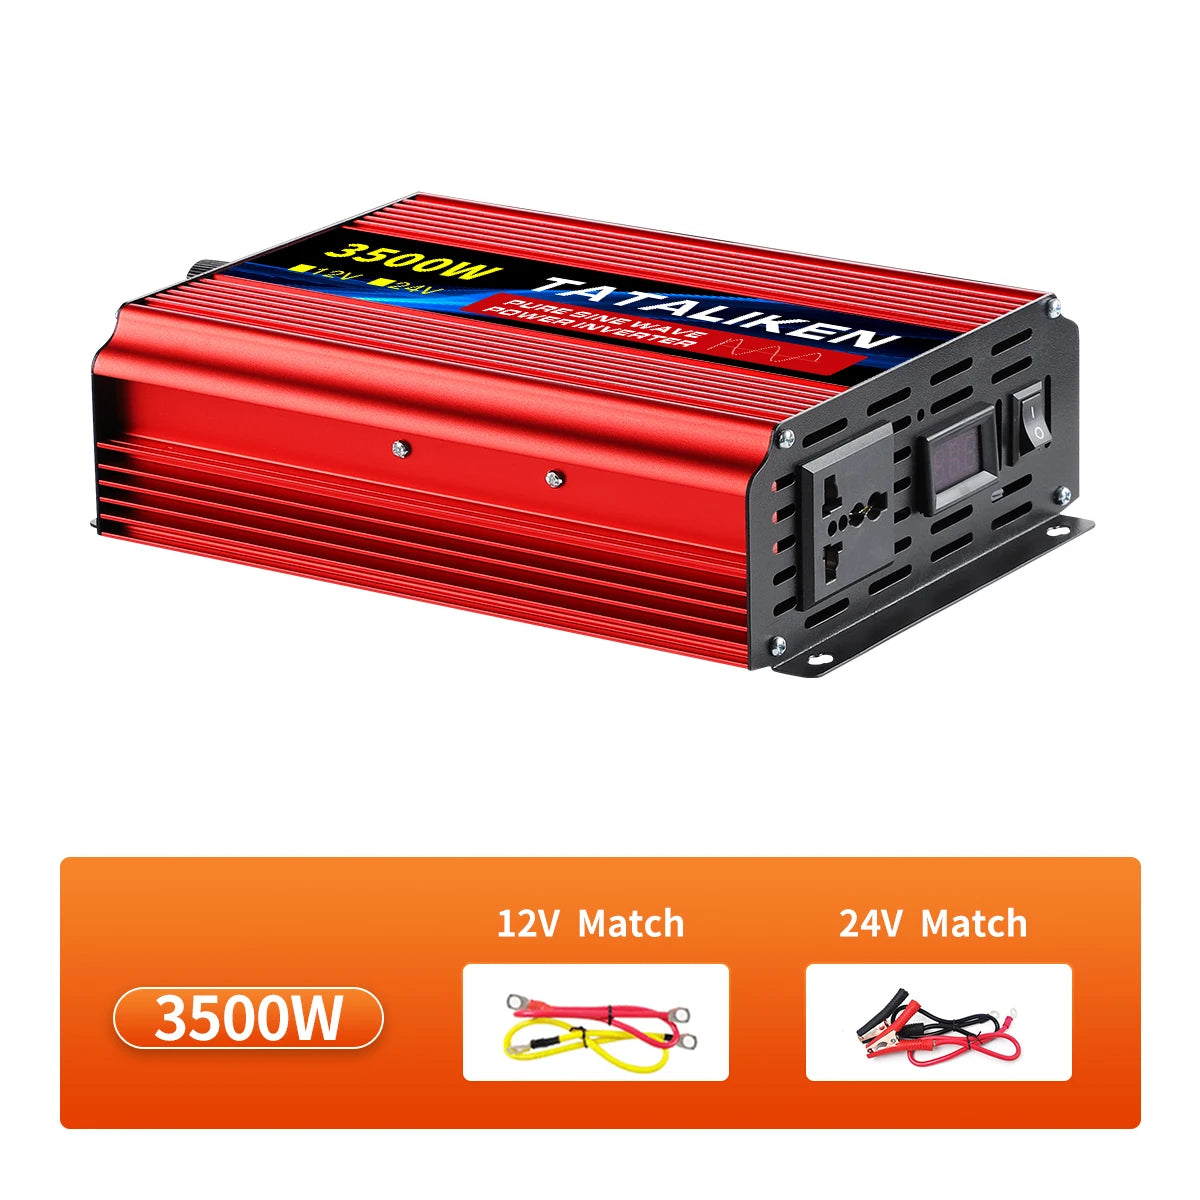 pure sine wave inverter, Universal power adapter, 1500W, AC 220V output, 50Hz frequency, from Mainland China.